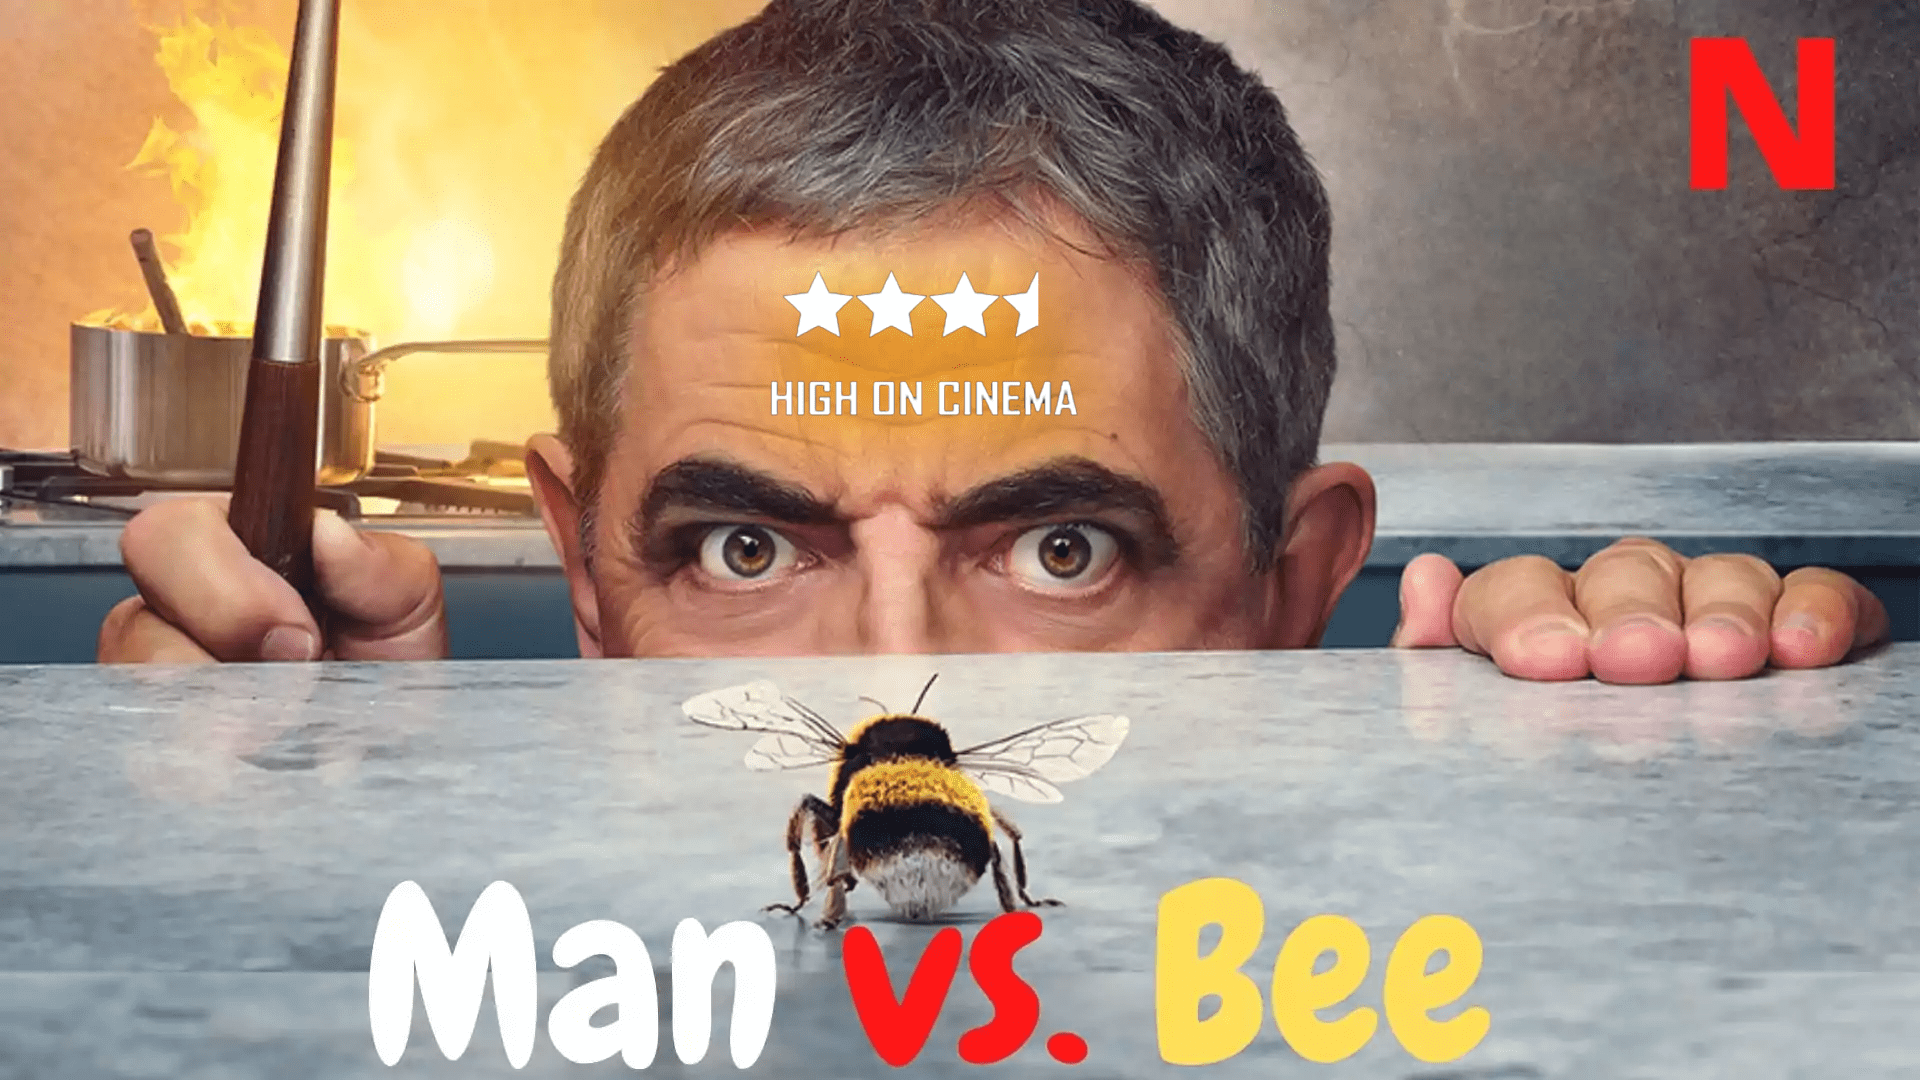 Man vs Bee Review: What's Buzz About? ON CINEMA